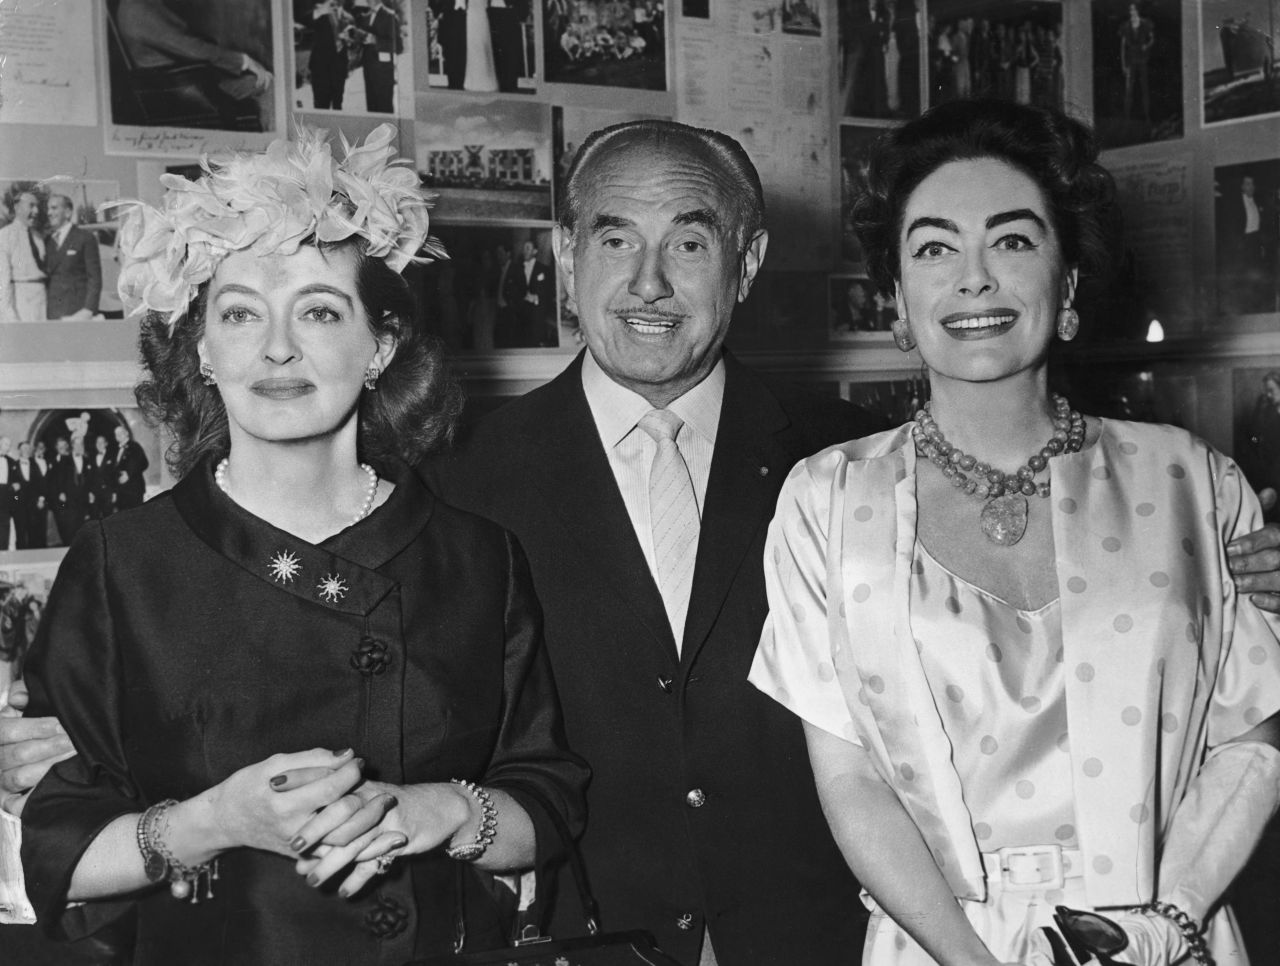 Studios were reluctant to finance "Baby Jane" with such "mature stars" in the leads. Seven Arts finally agreed to do the film, with Warner Bros. releasing it. Here, Warner studio chief Jack L. Warner promotes the movie with the two actresses in 1962. Davis, known as the fourth Warner brother when she was a box-office queen, often called Warner a father figure, but she stormed off the Warner lot on bad terms in 1949. Crawford had been her rival at the studio.